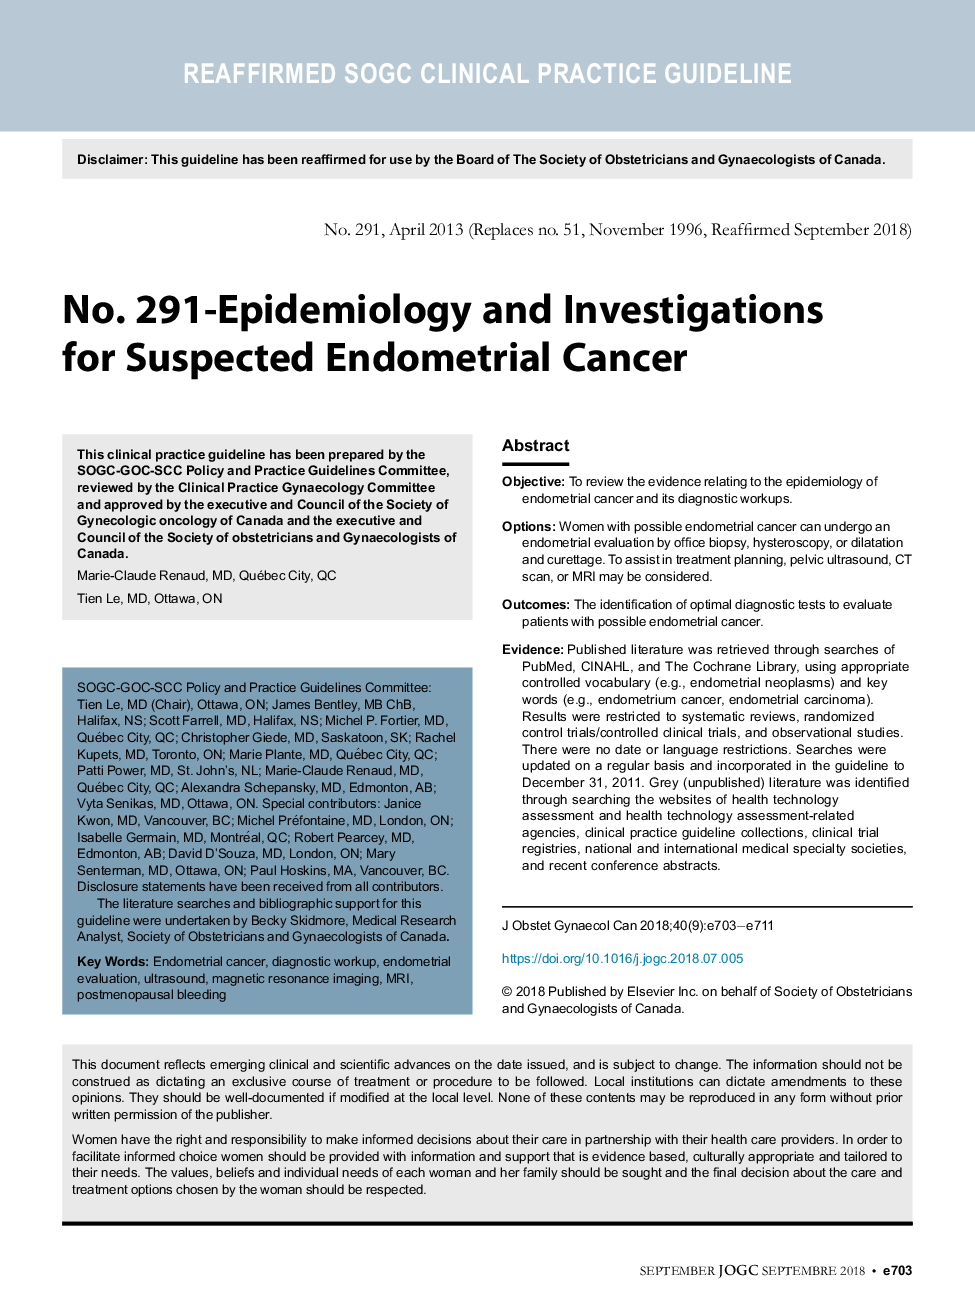 No. 291-Epidemiology and Investigations forSuspected Endometrial Cancer